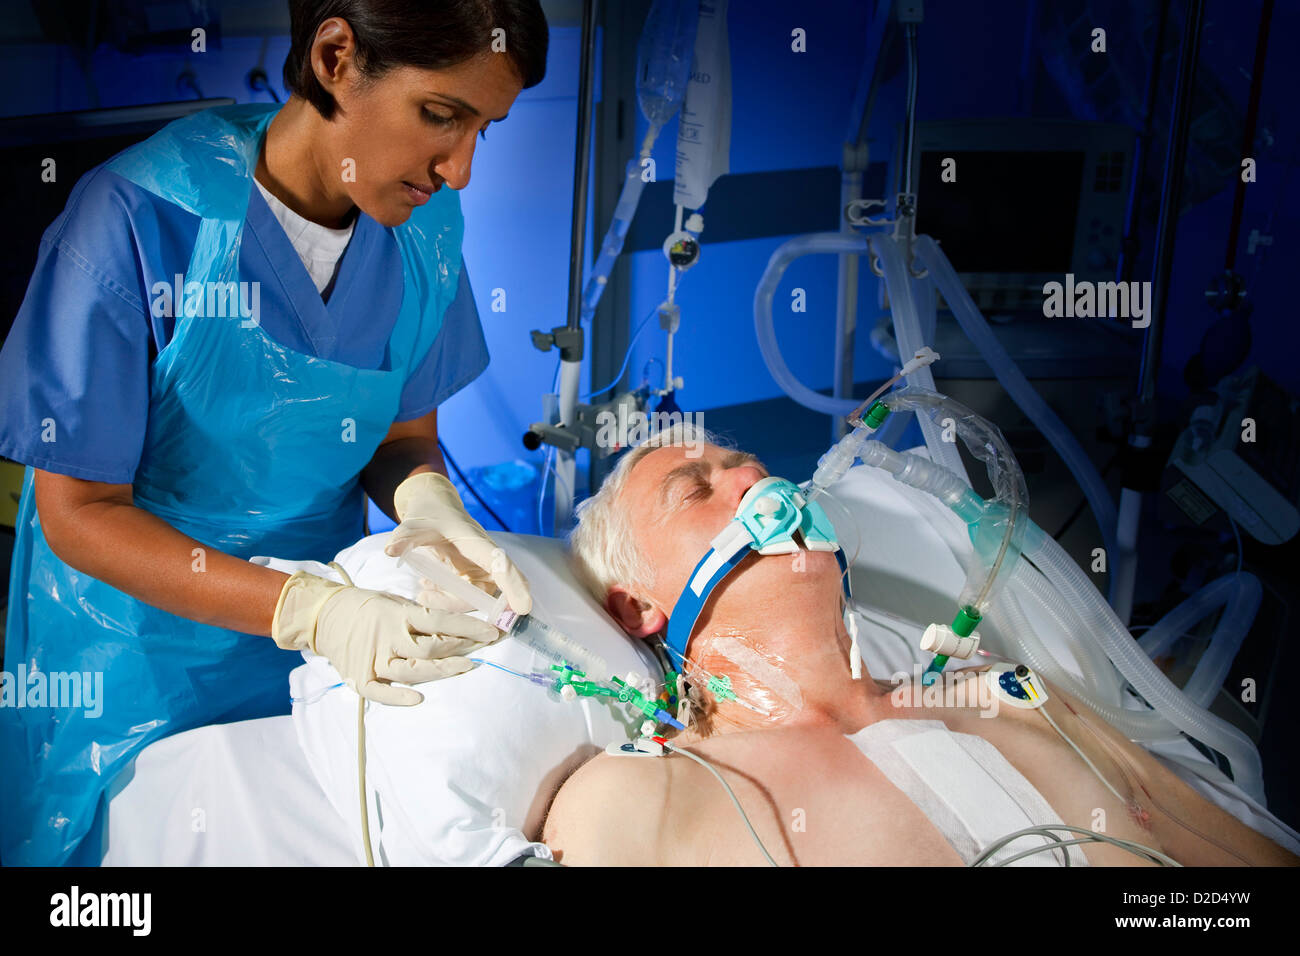 MODEL RELEASED Administering drugs through a central line Stock Photo